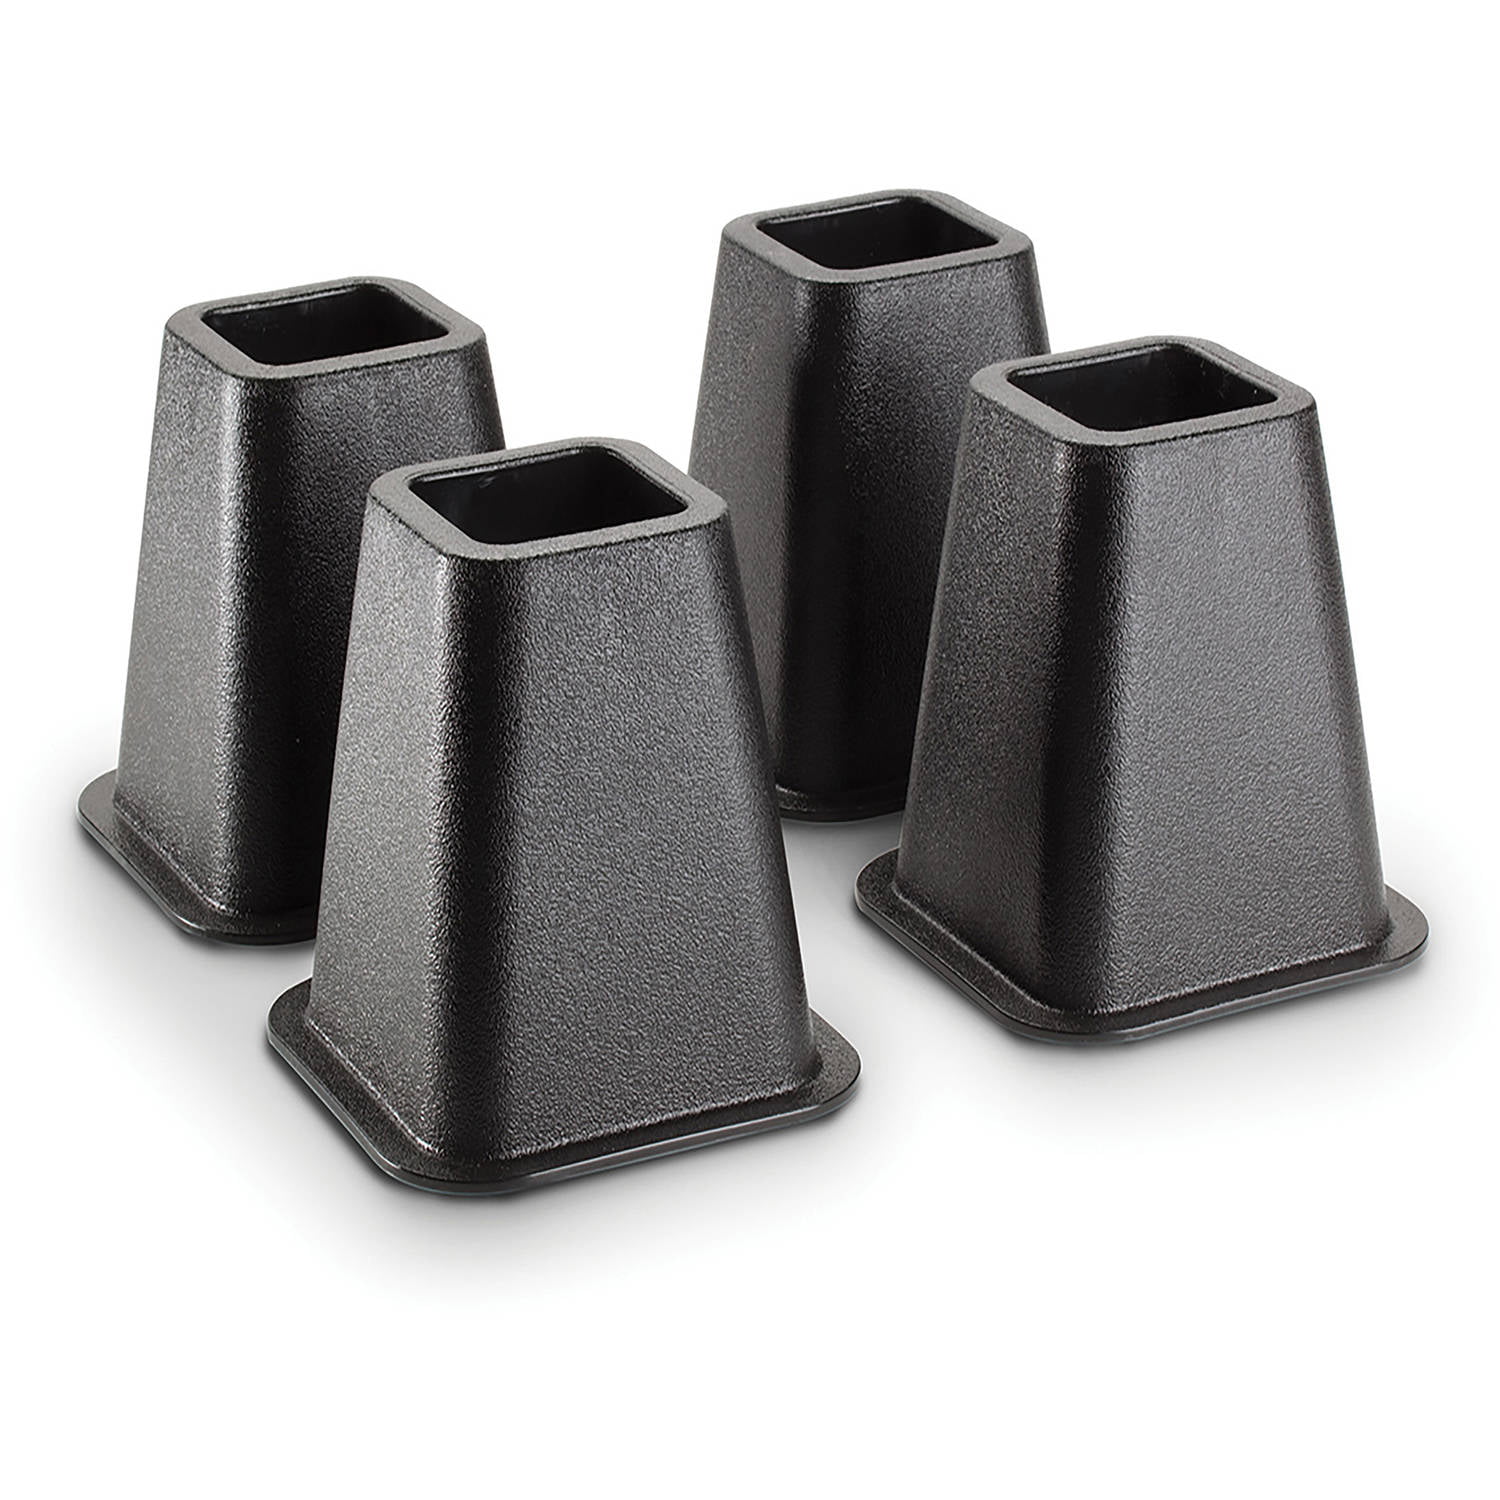 Bed Risers Black Set Of 4 Plastic 5.25 Inches 